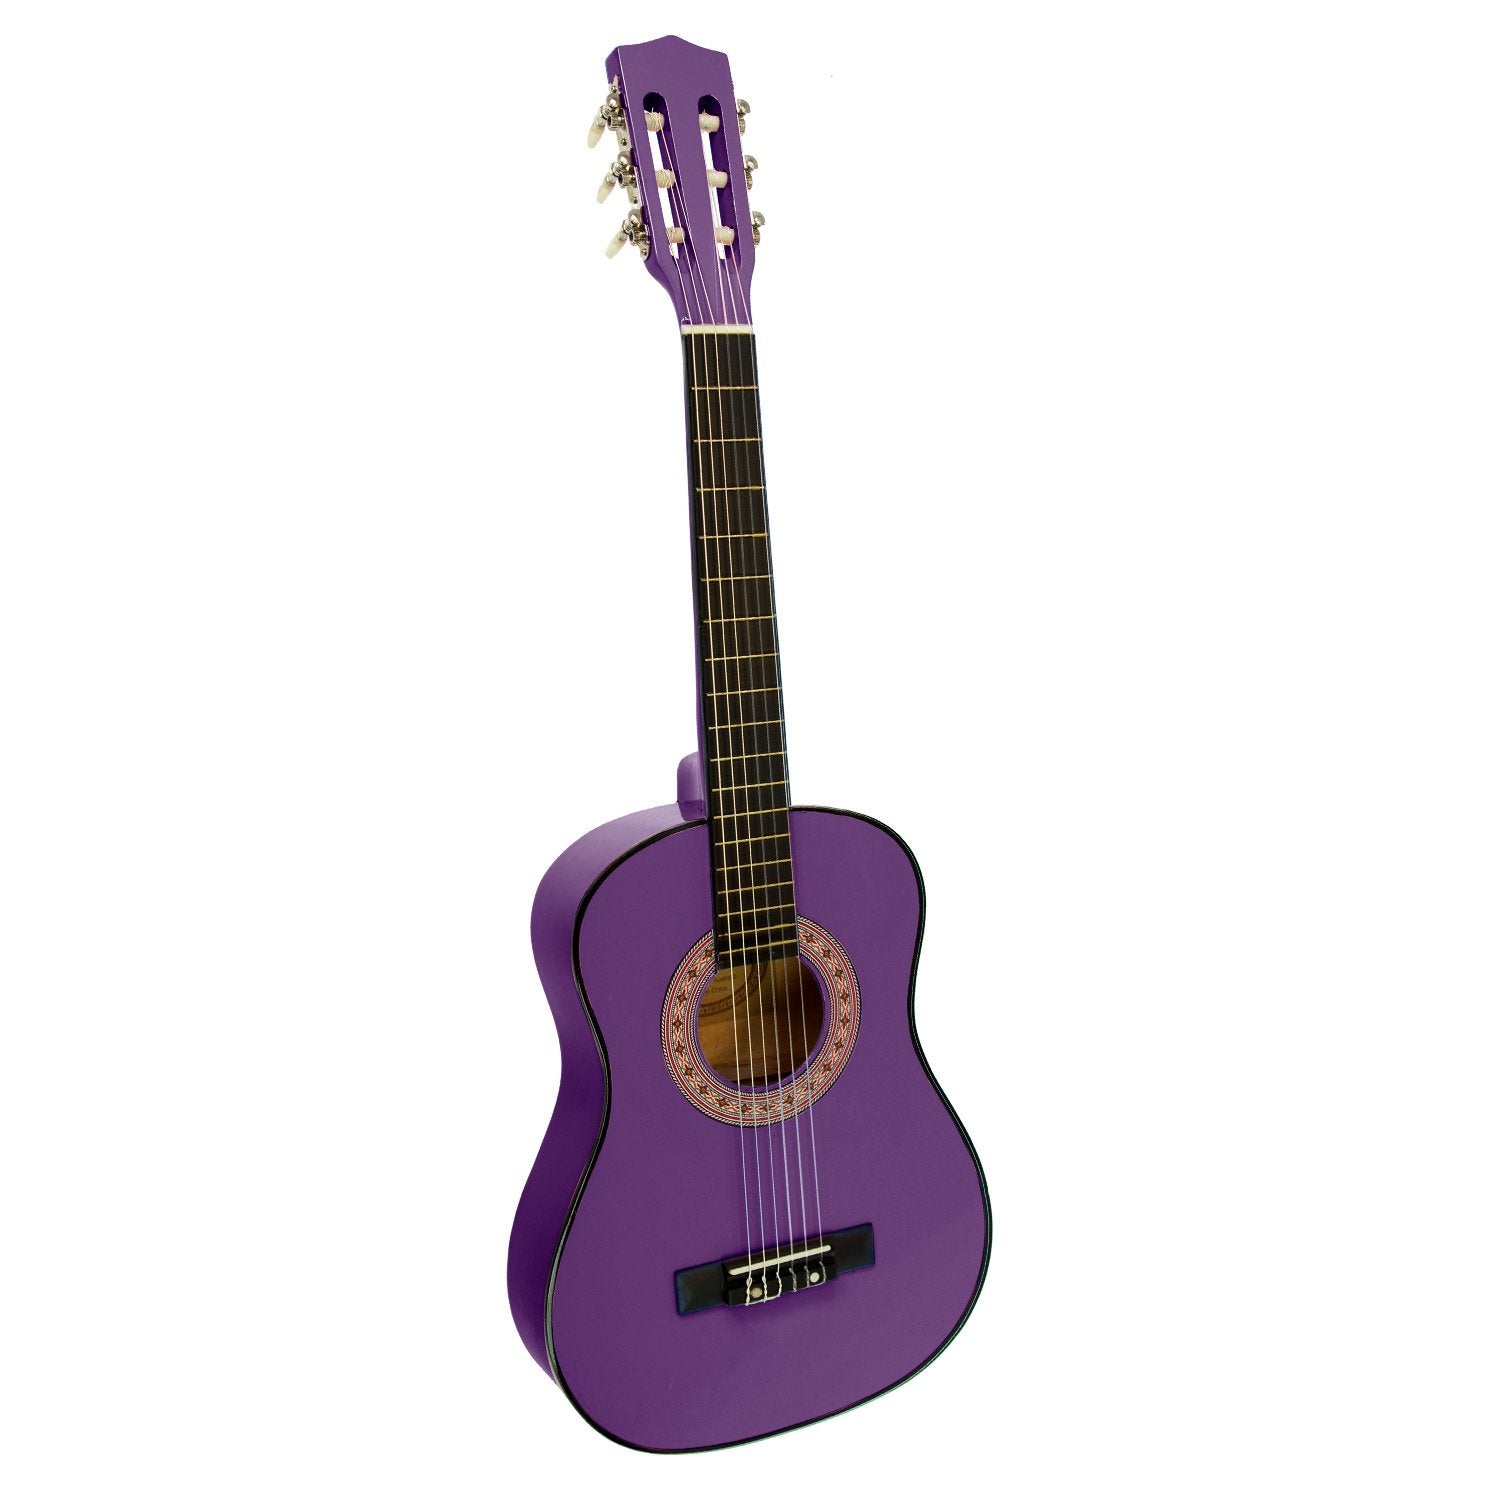 34in Acoustic Wooden Guitar for Kids with Bag - Karrera